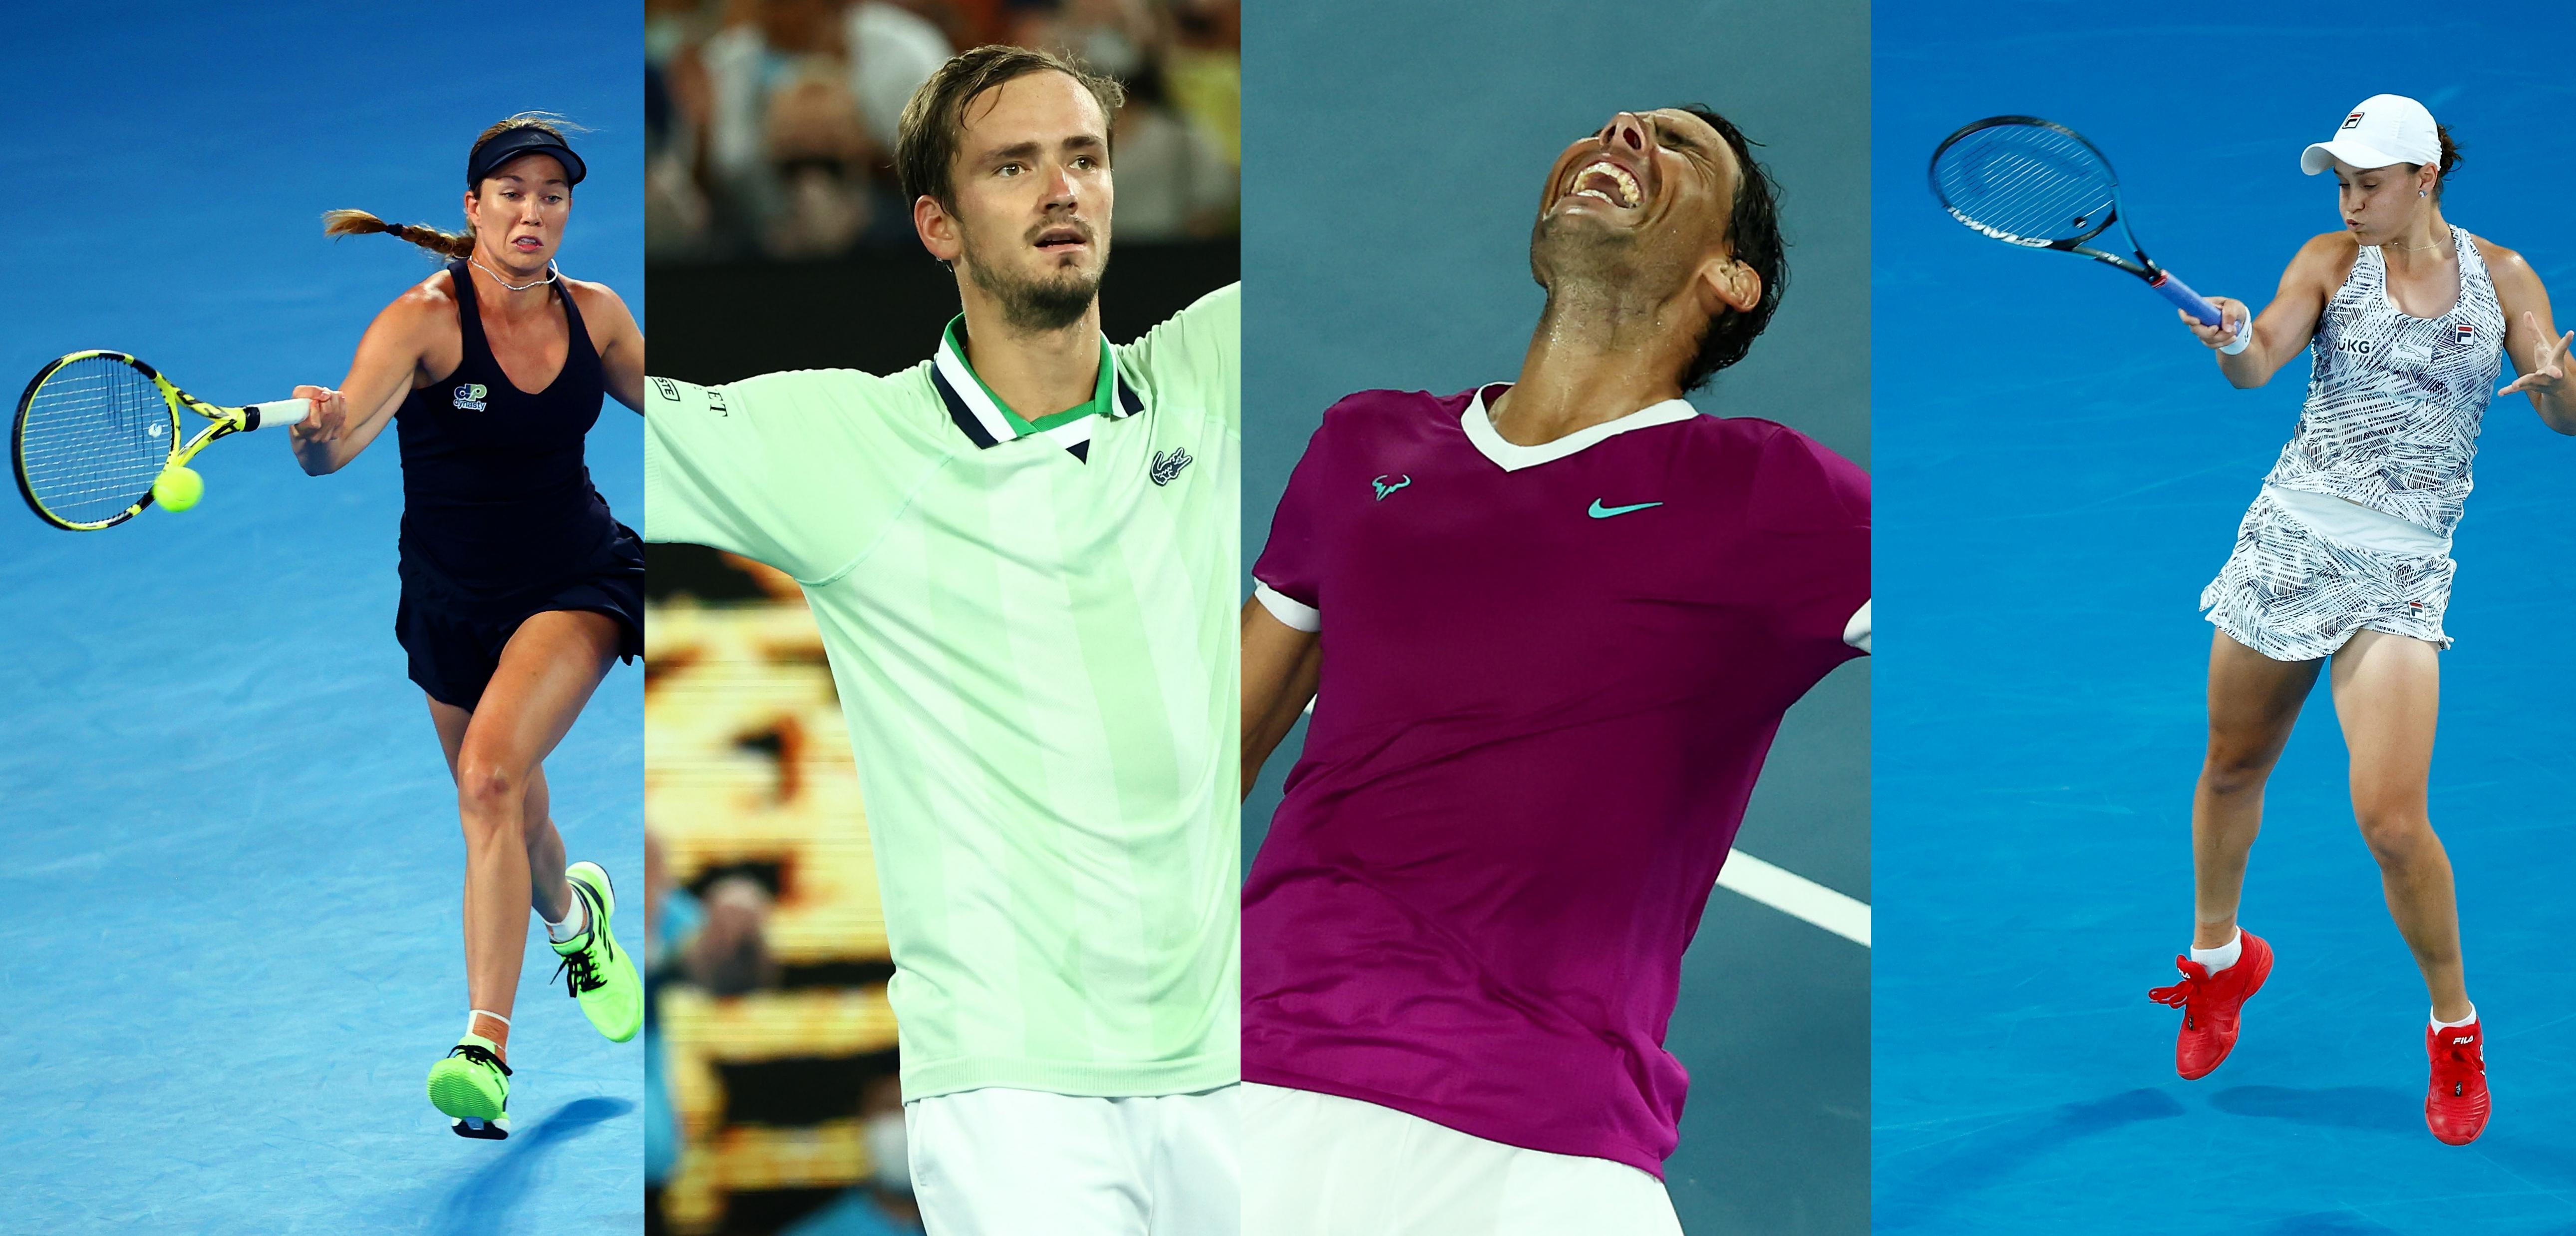 The Best Stats Ahead of the Men’s and Women’s Singles Finals at the Australian Open